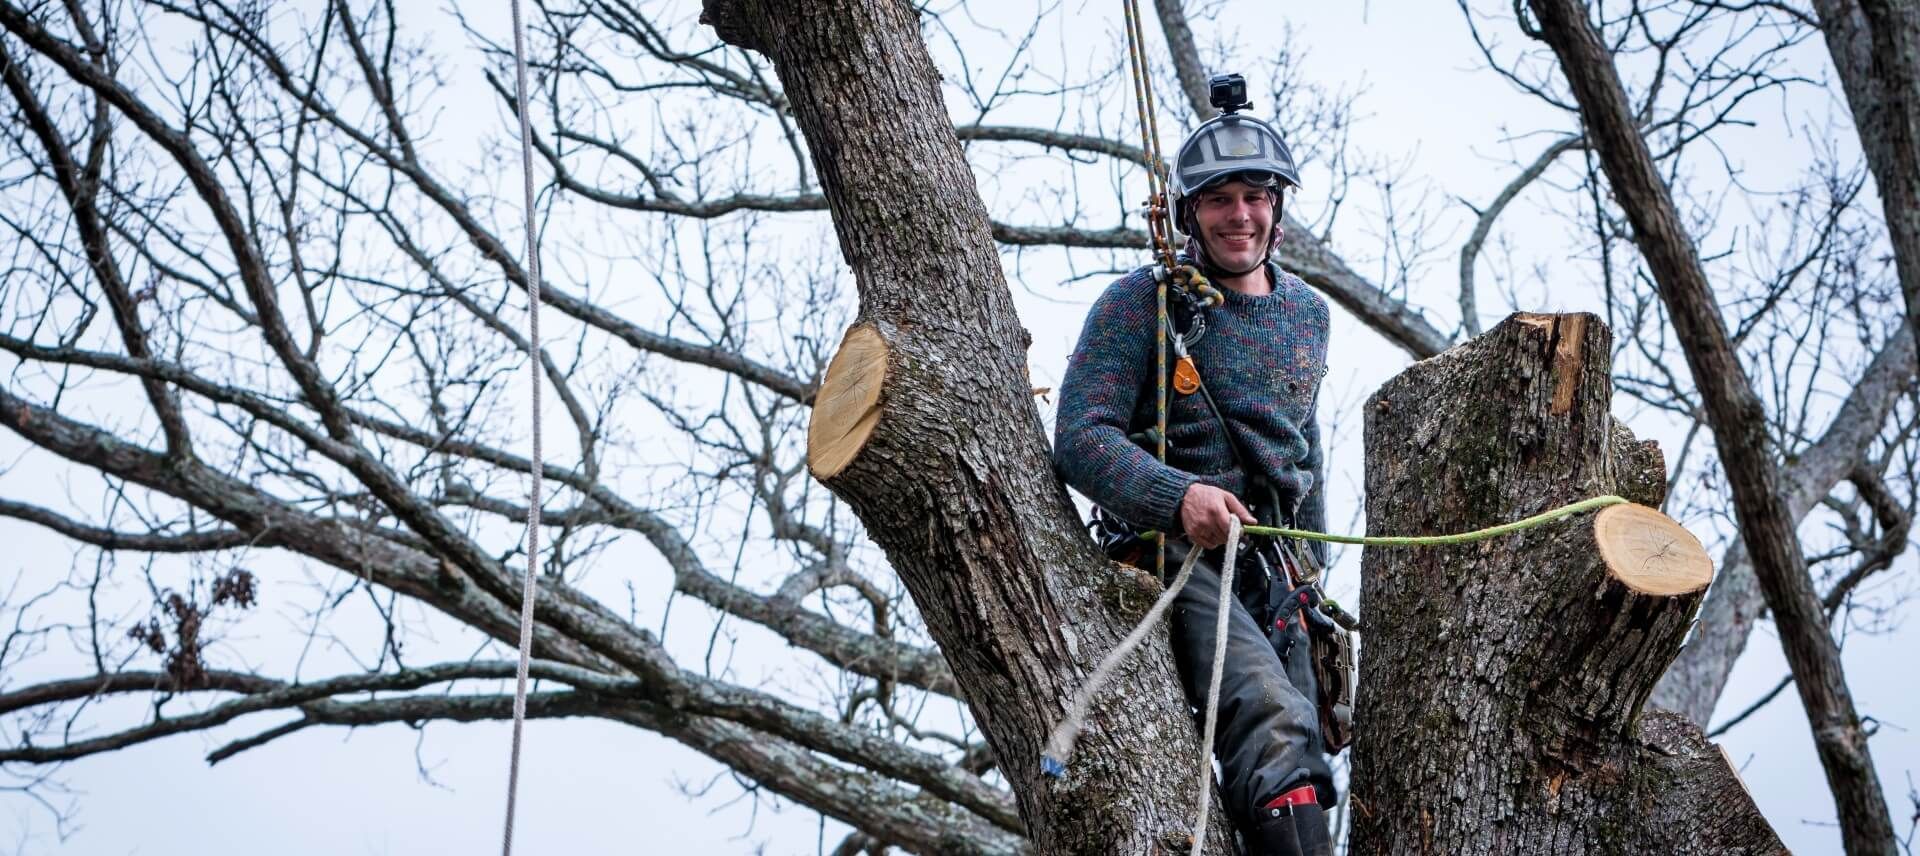 A smiling arborist working on top of a tree while on duty